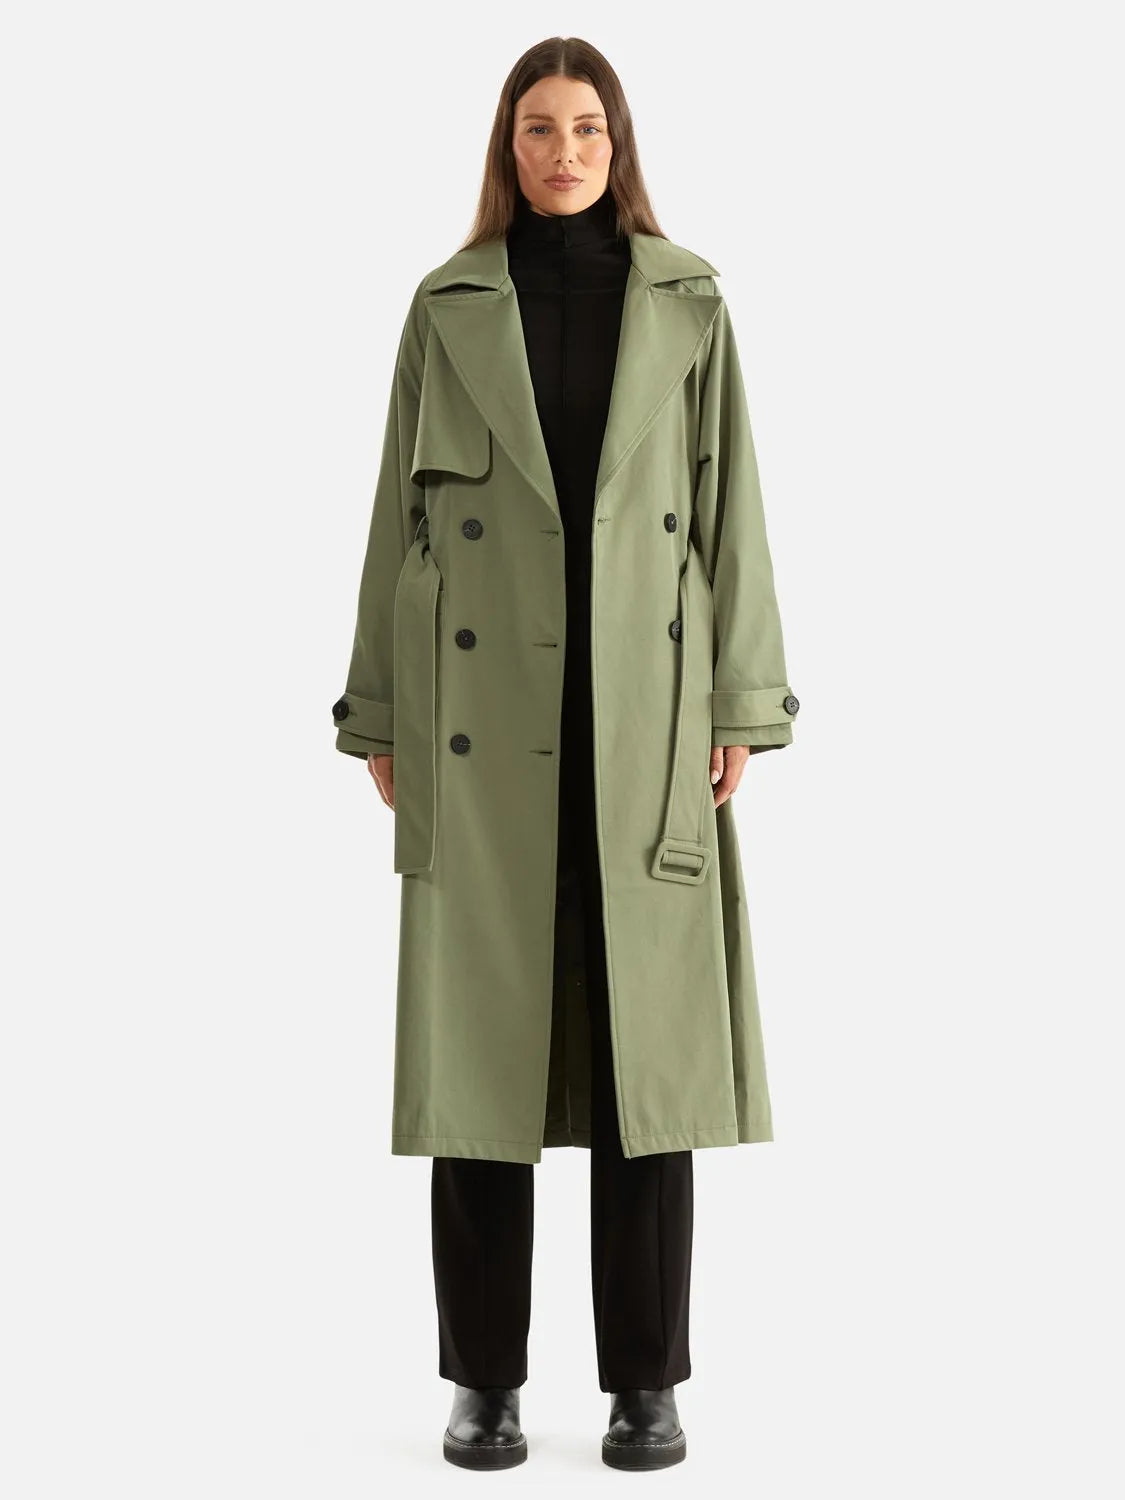 Ena Pelly | Carrie Trench Coat - Forest